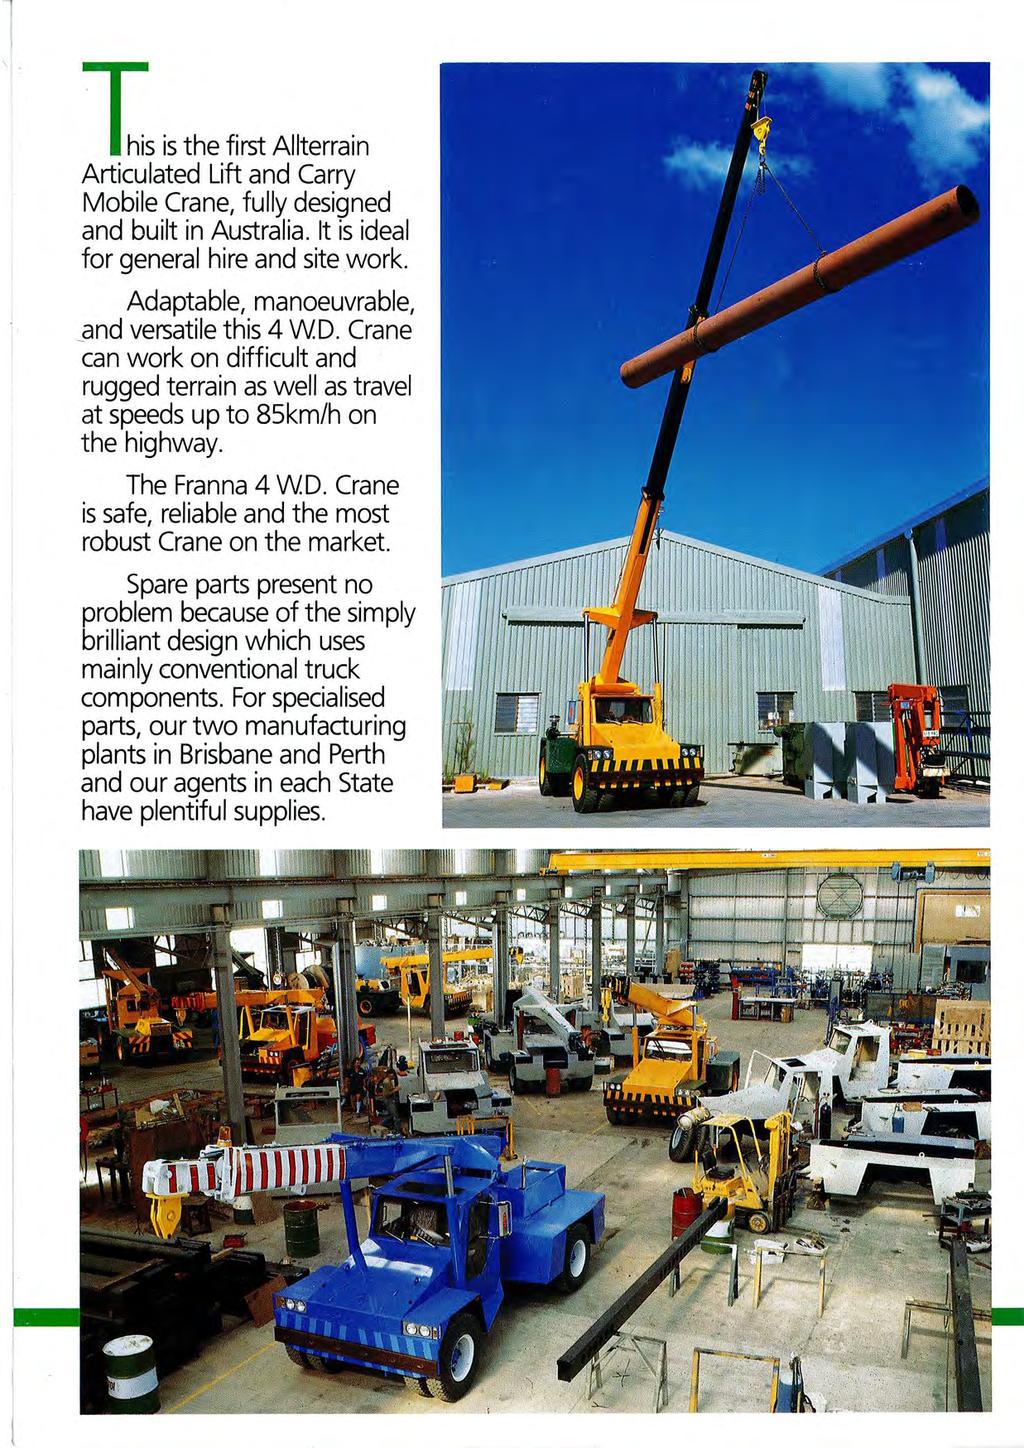 his is the first Allterrain Articulated Lift and Carry Mobile Crane, fully designed and built in Australia. It is ideal for general hire and site work. Adaptable, manoeuvrable, and versatile this 4 W.